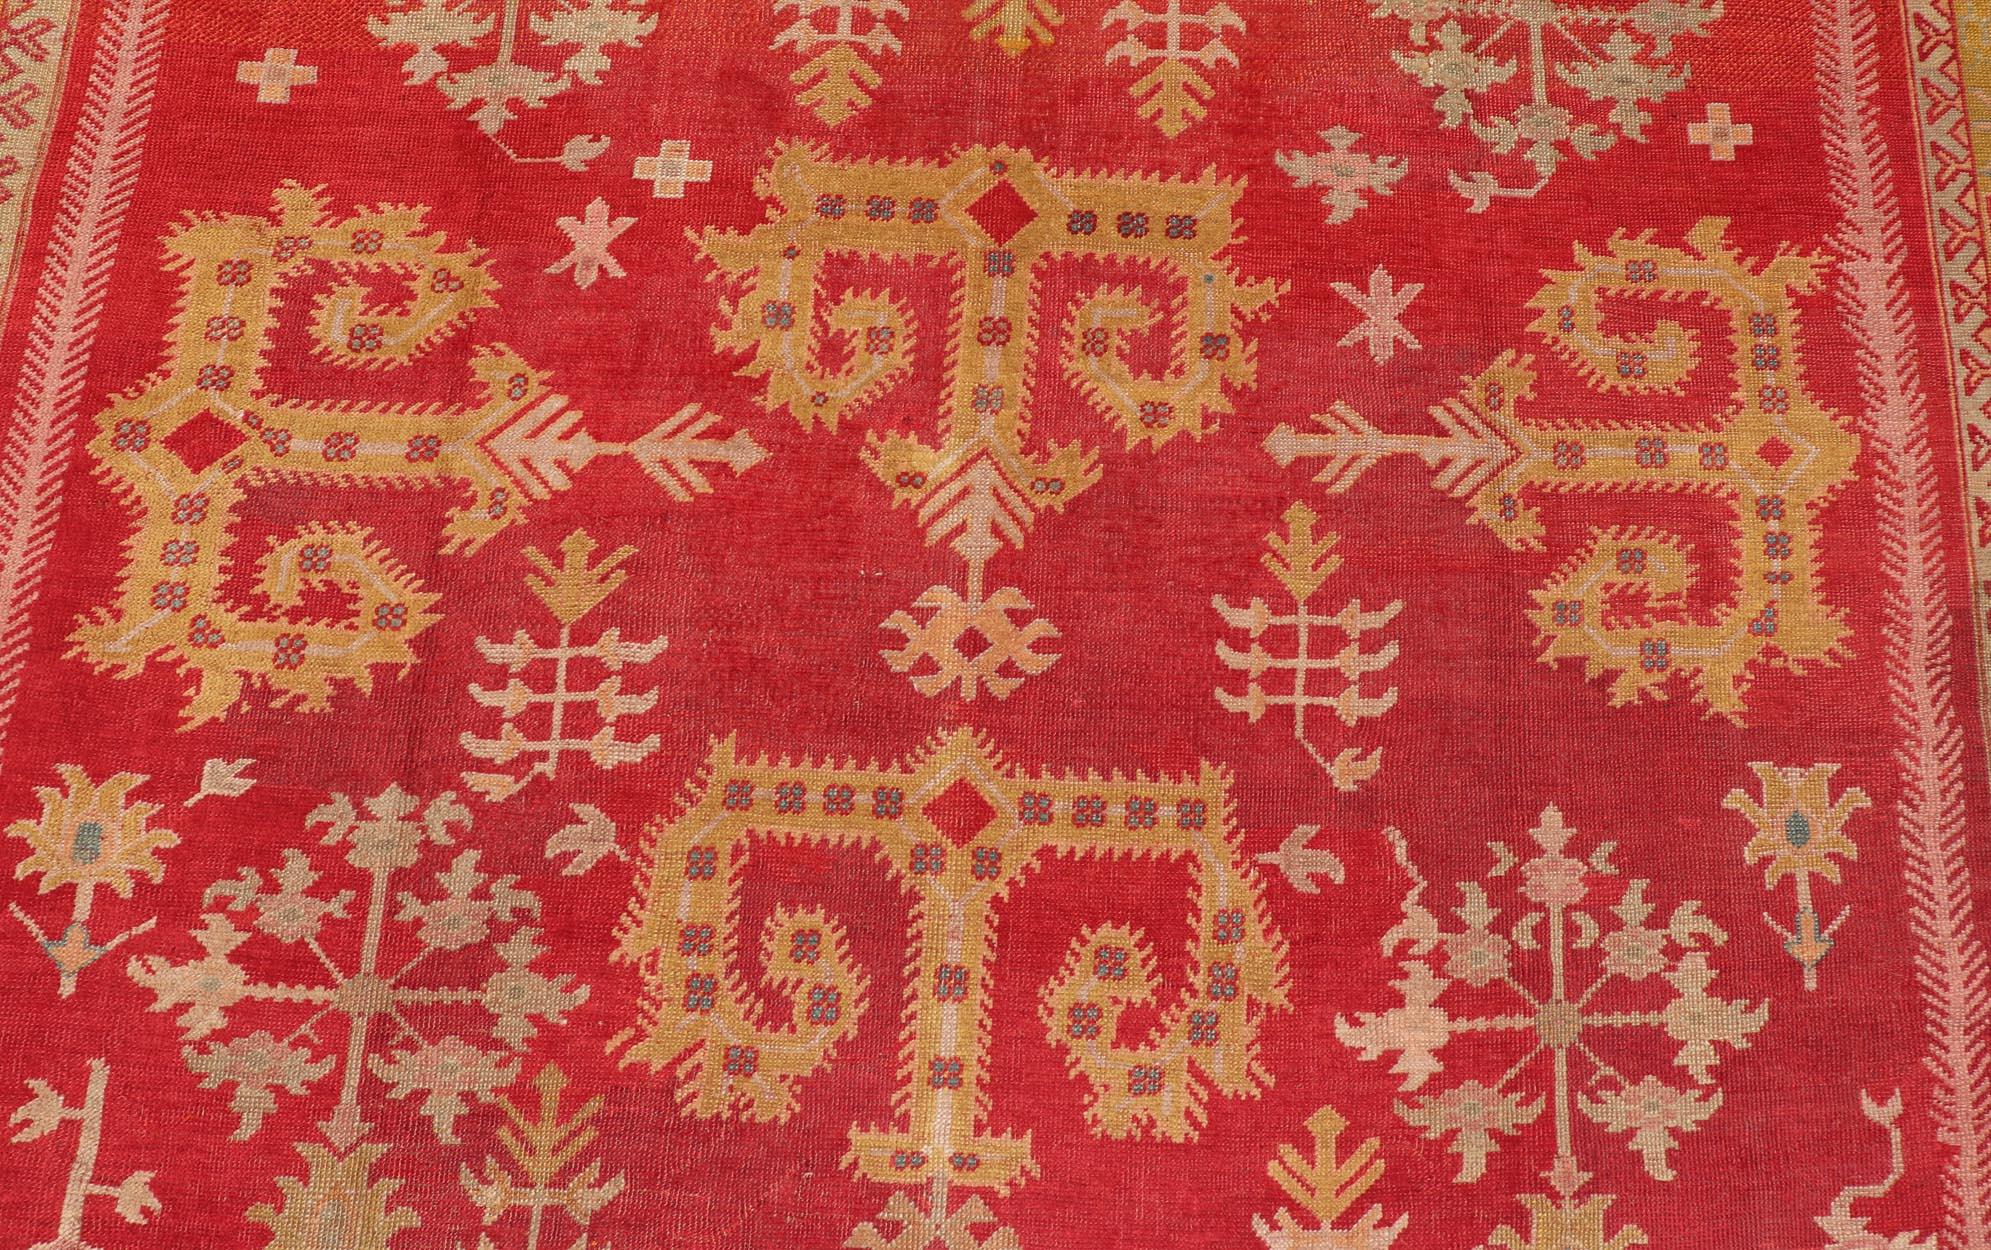 Antique Turkish Oushak Rug in Royal Red and Saffron Gold with Geometric Design For Sale 11